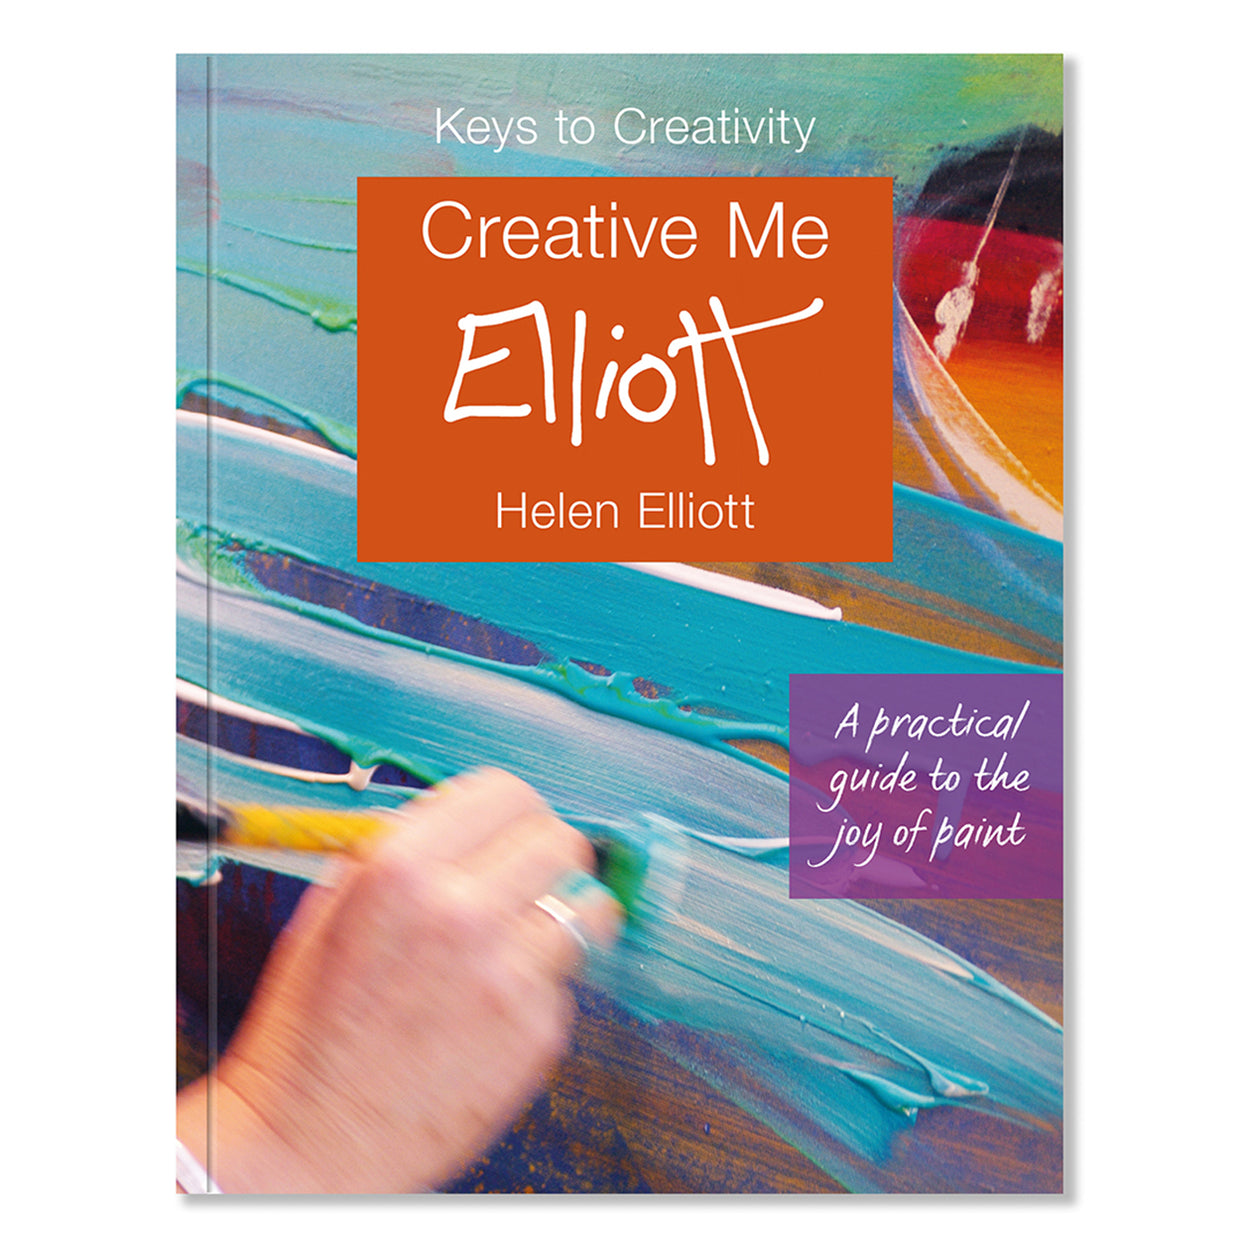 Creative Me: Keys to Creativity and A practical guide to the joy of paint by Helen Elliot book cover